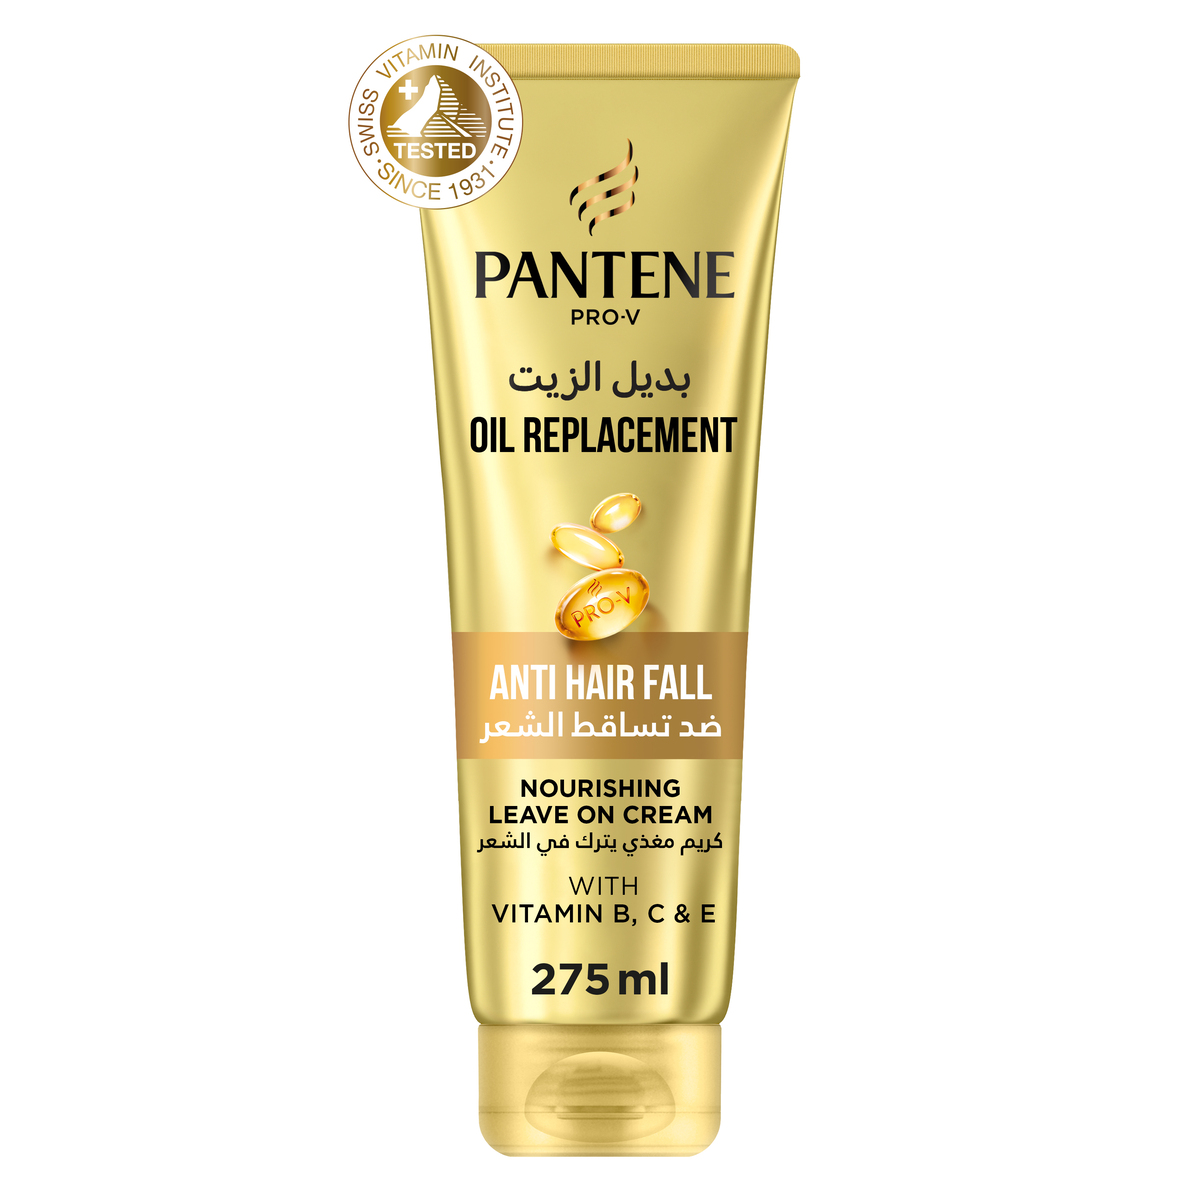 Pantene Pro-V Hair Oil Replacement Leave On Cream Anti-Hairfall 275 ml